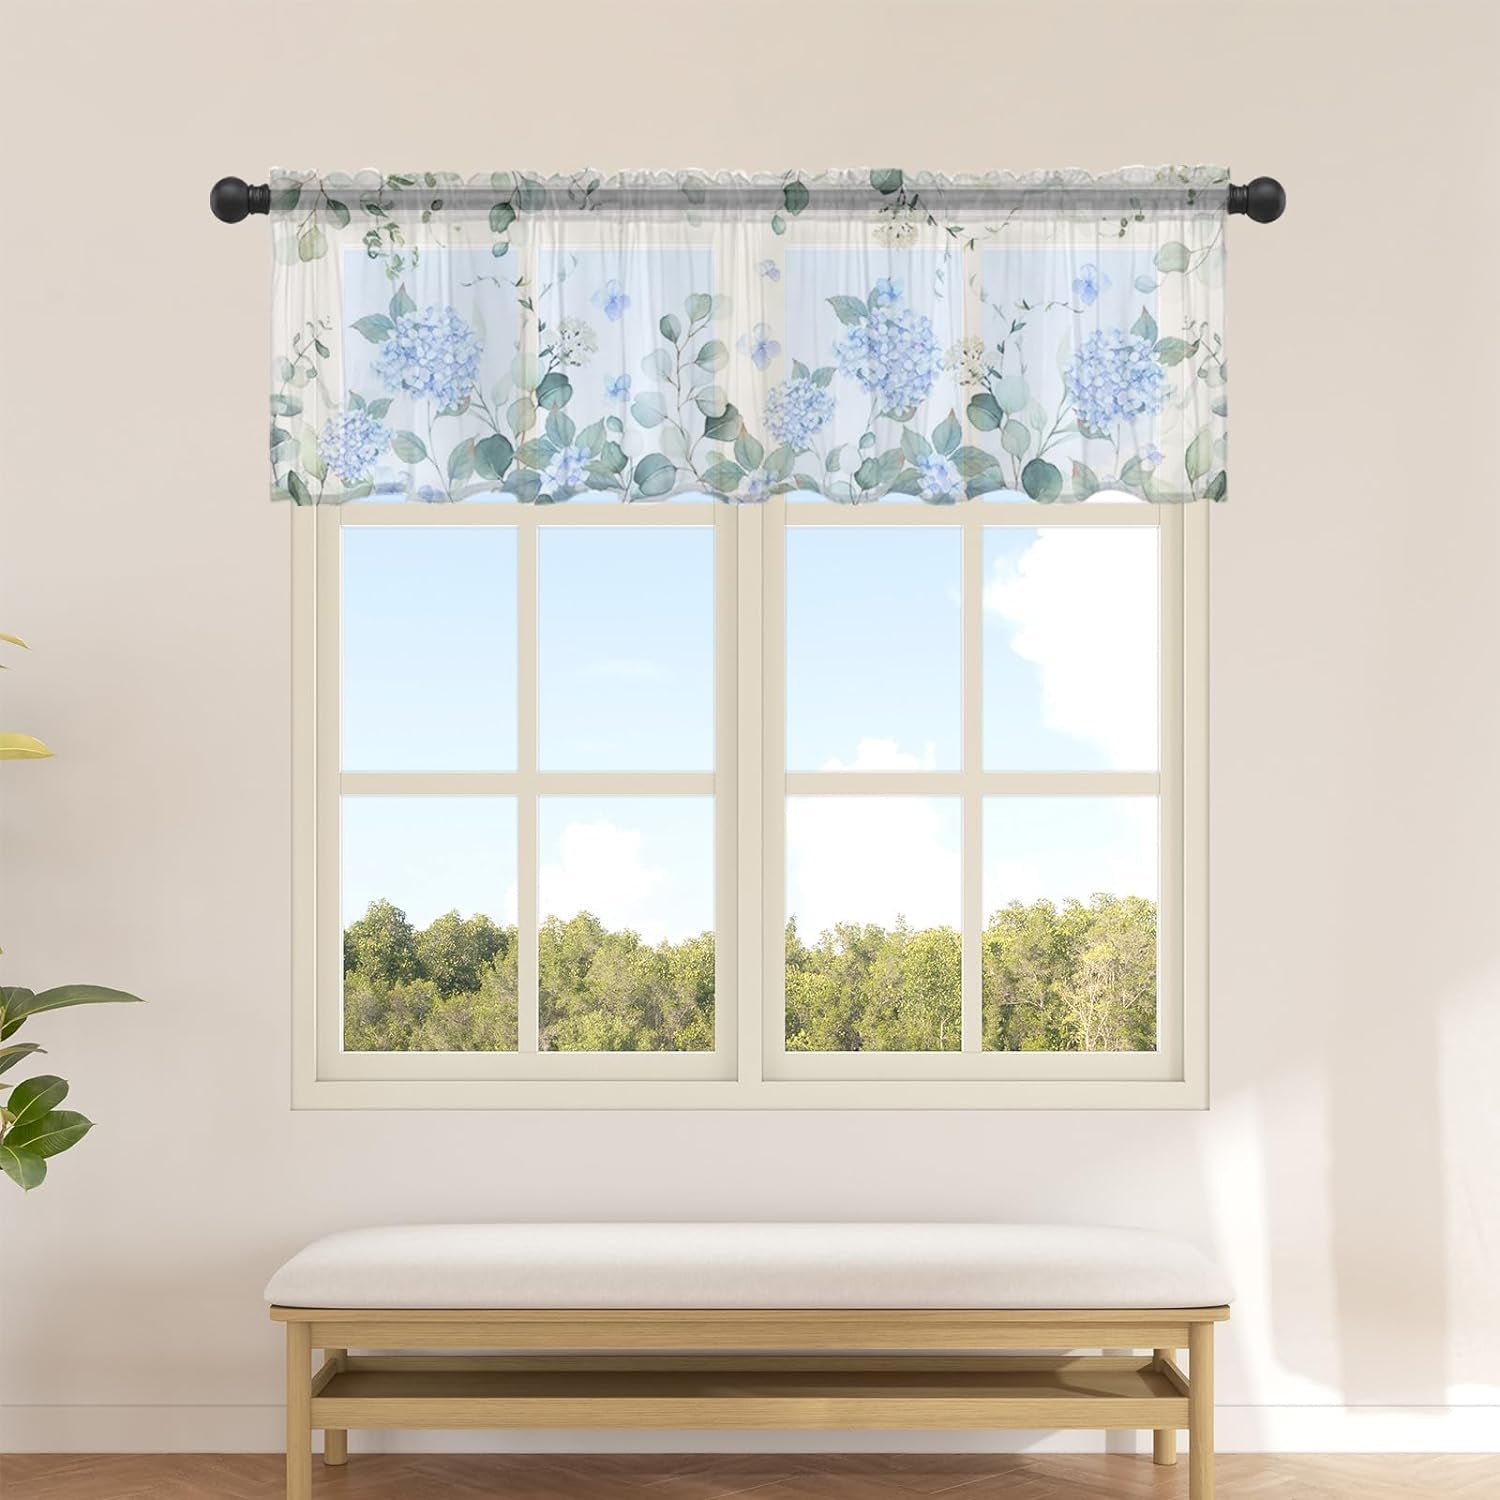 Eucalyptus Hydrangea Valance Curtains for Kitchen/Living Room/Bathroom/Bedroom Window,Rod Pocket Small Topper Half Short Window Curtains Voile Sheer Scarf, Watercolor Flowers Rustic Chic Plant 54"X18"